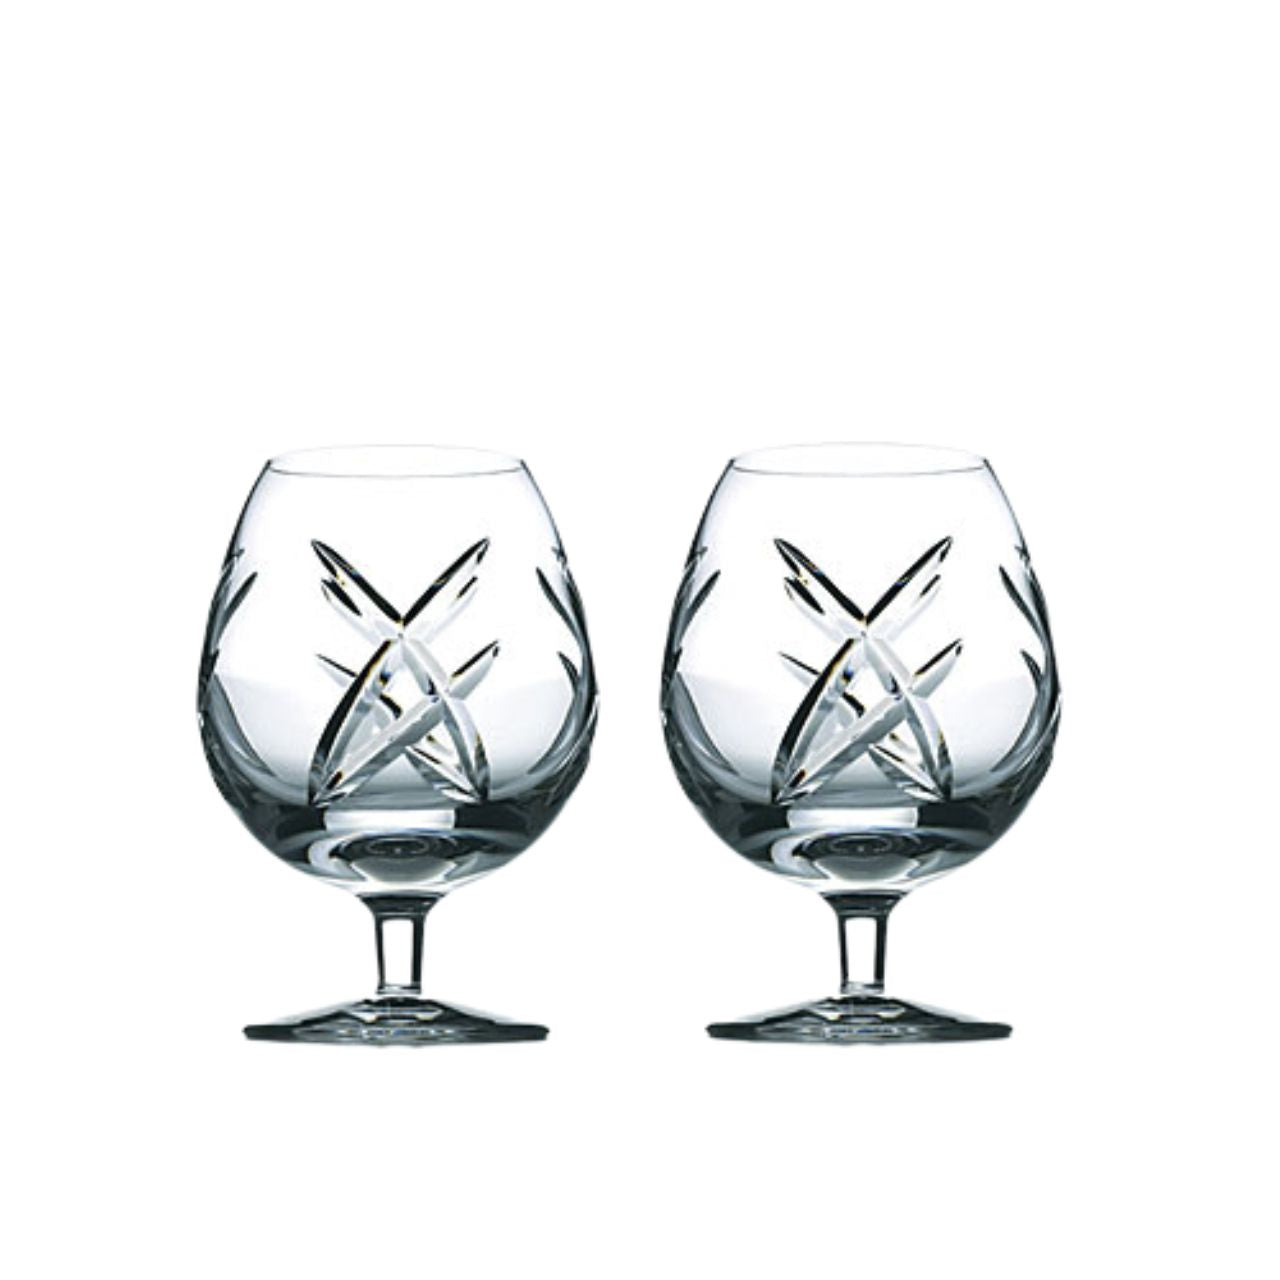 Waterford John Rocha Signature Brandy Glasses Set of 2  John Rocha captures the clarity and purity of Waterford Crystal with his contemporary collection of stemware.